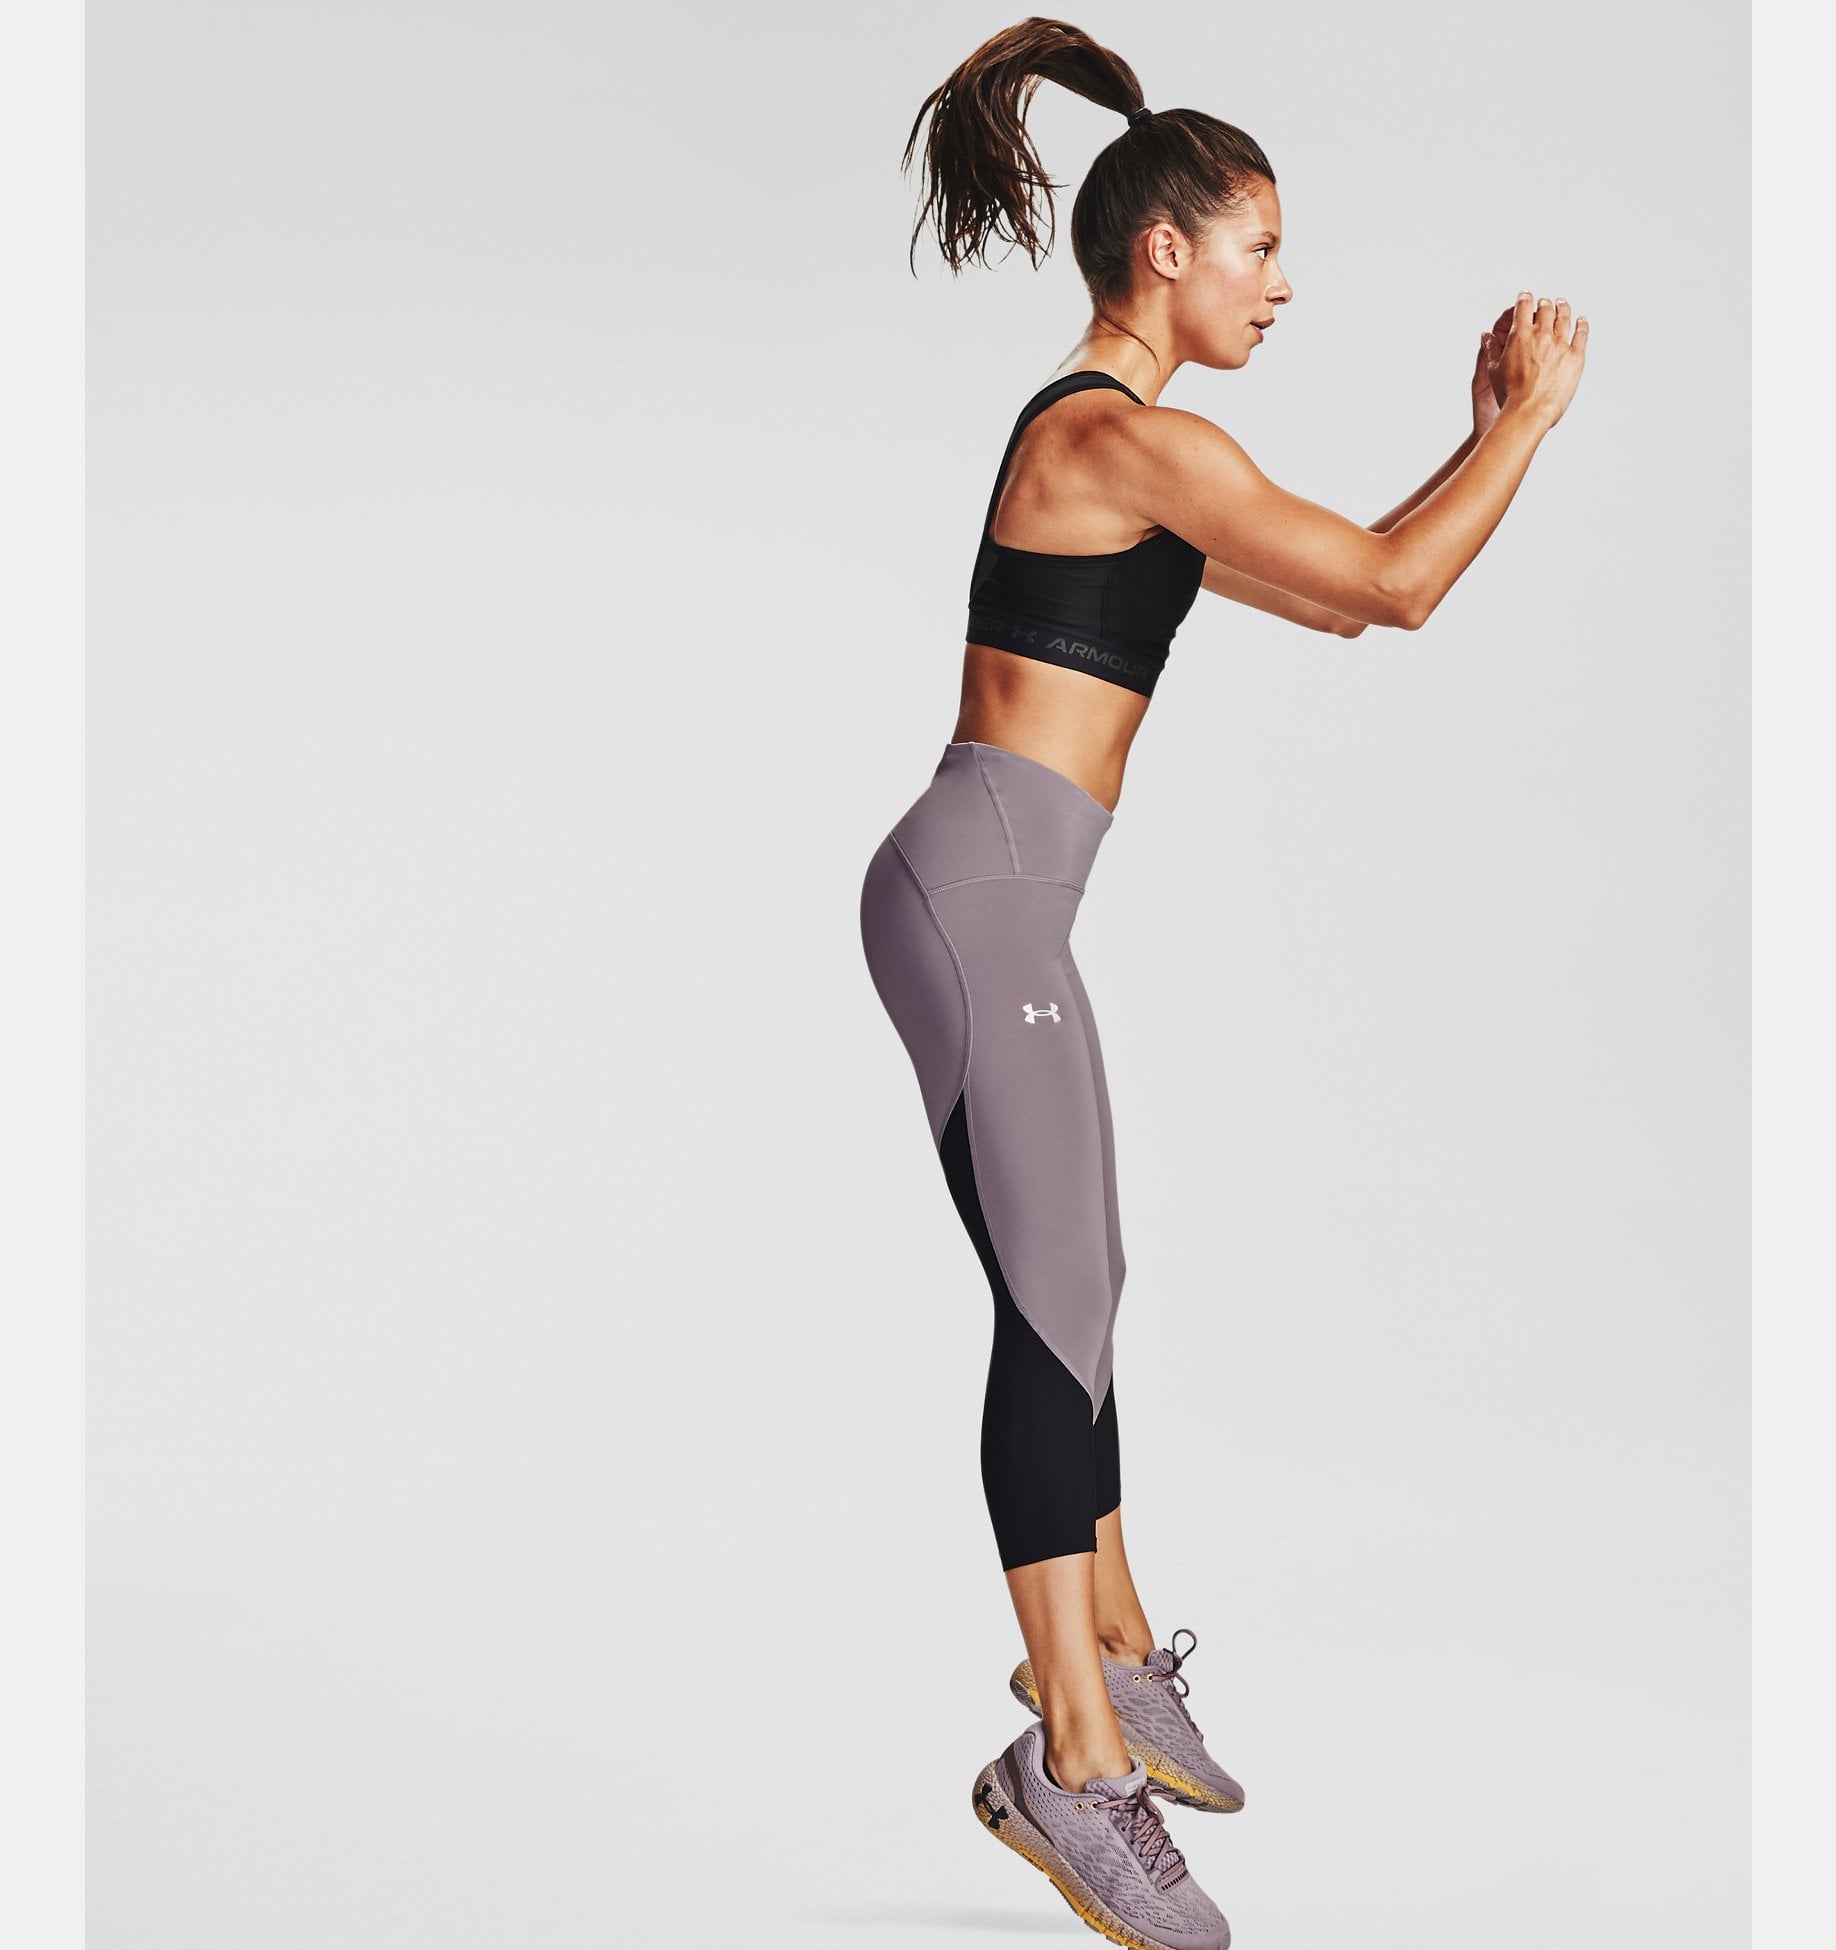 Under Armour Leggings to Wear Even During Summer Months